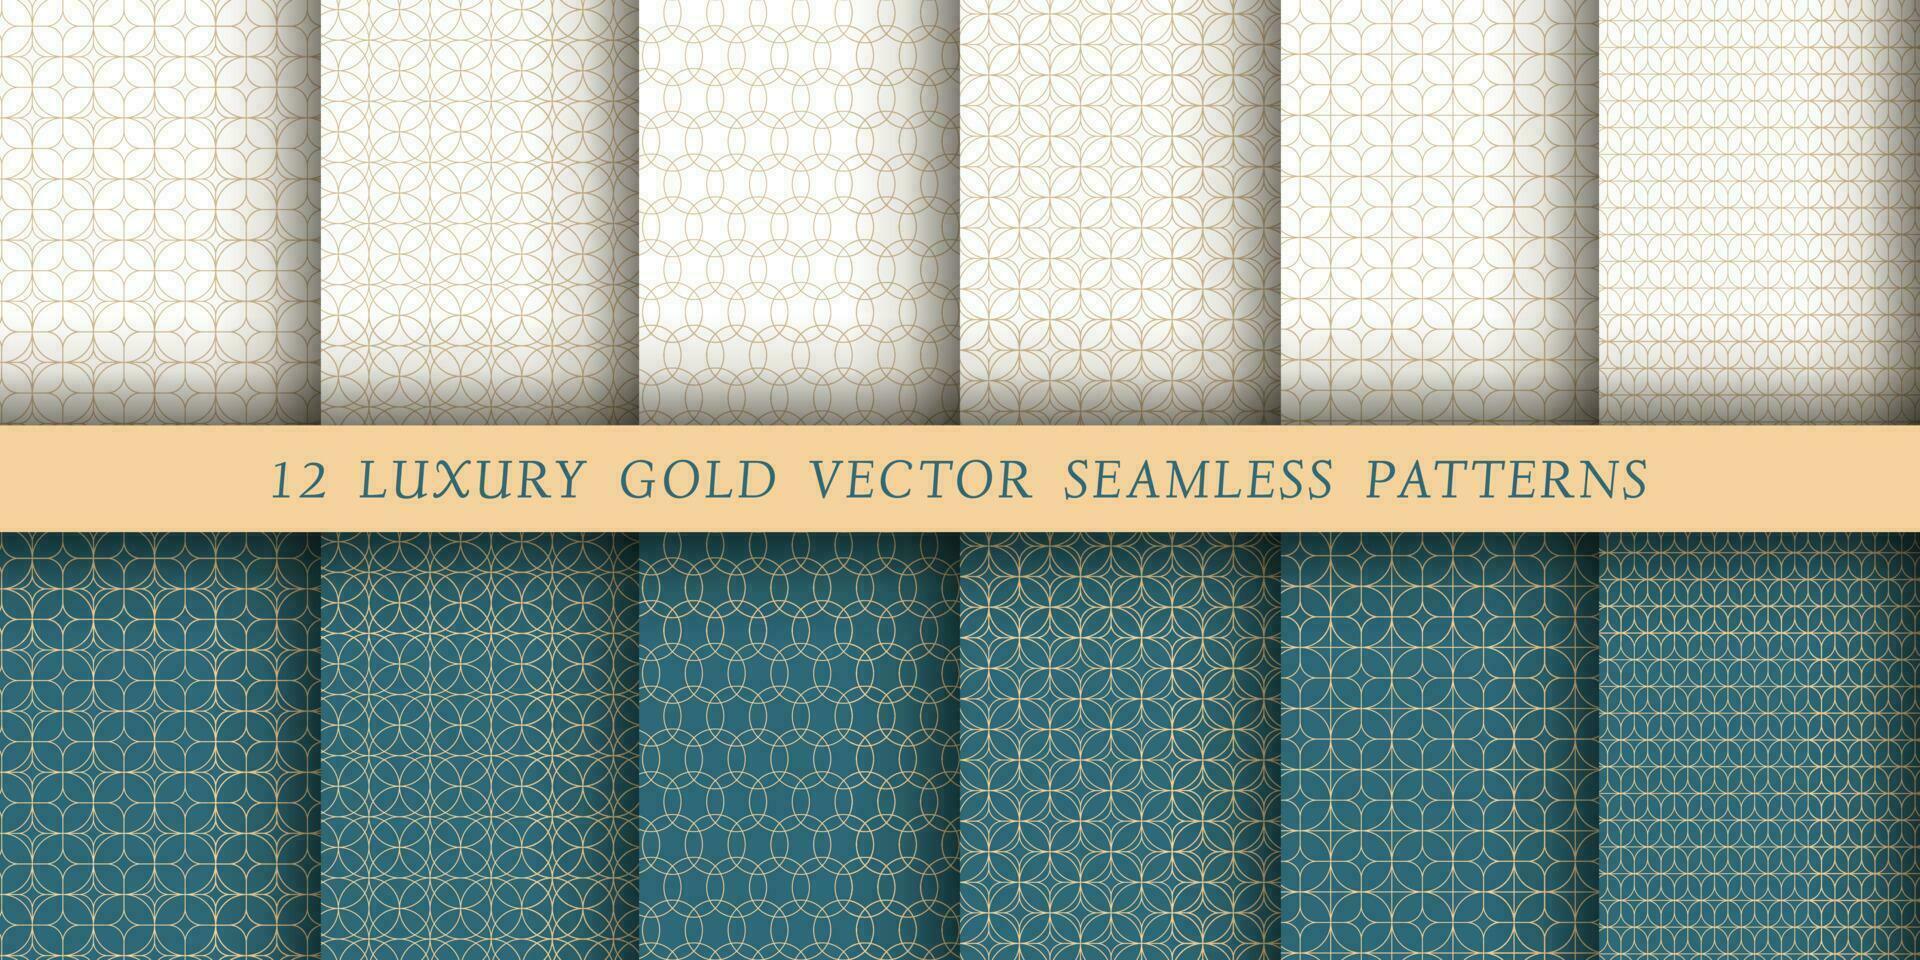 Set of 12 luxurious vector seamless patterns. Geometrical patterns on a white and emerald background. Modern illustrations for wallpapers, flyers, covers, banners, minimalistic ornaments, background